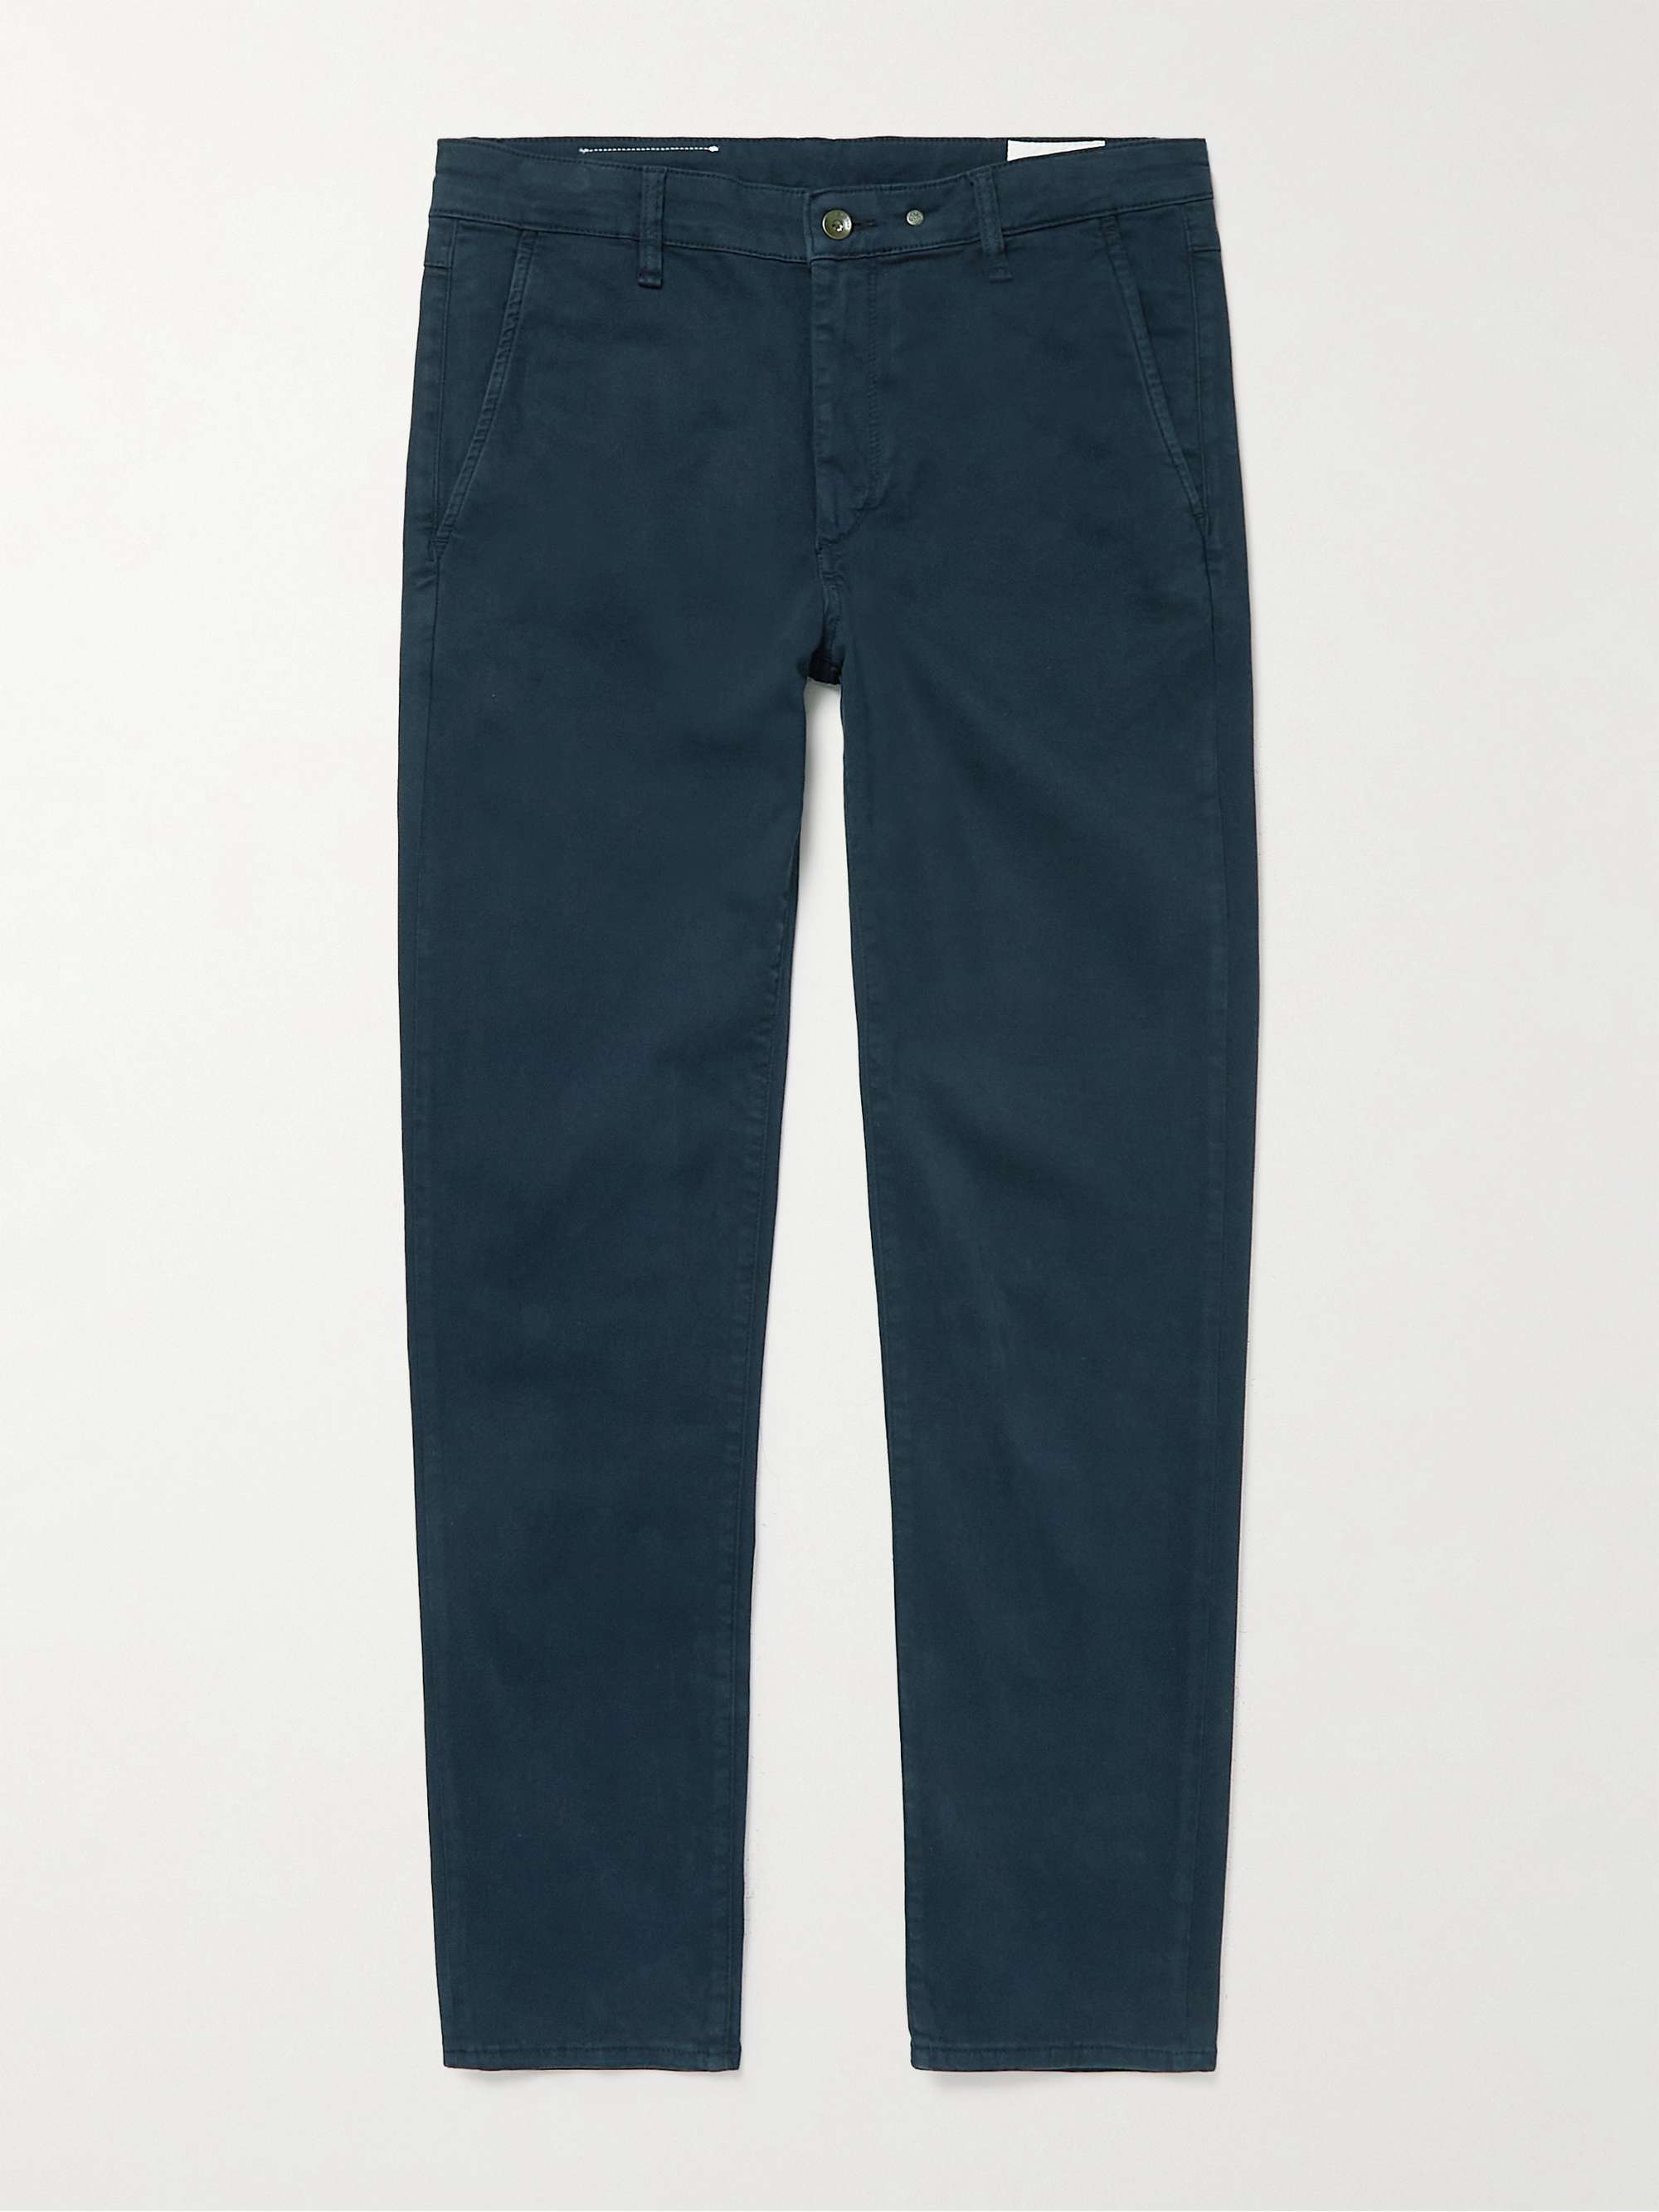 Slacks and Chinos Skinny trousers Womens Clothing Trousers Blue Rag & Bone Cotton Trouser in Dark Blue 